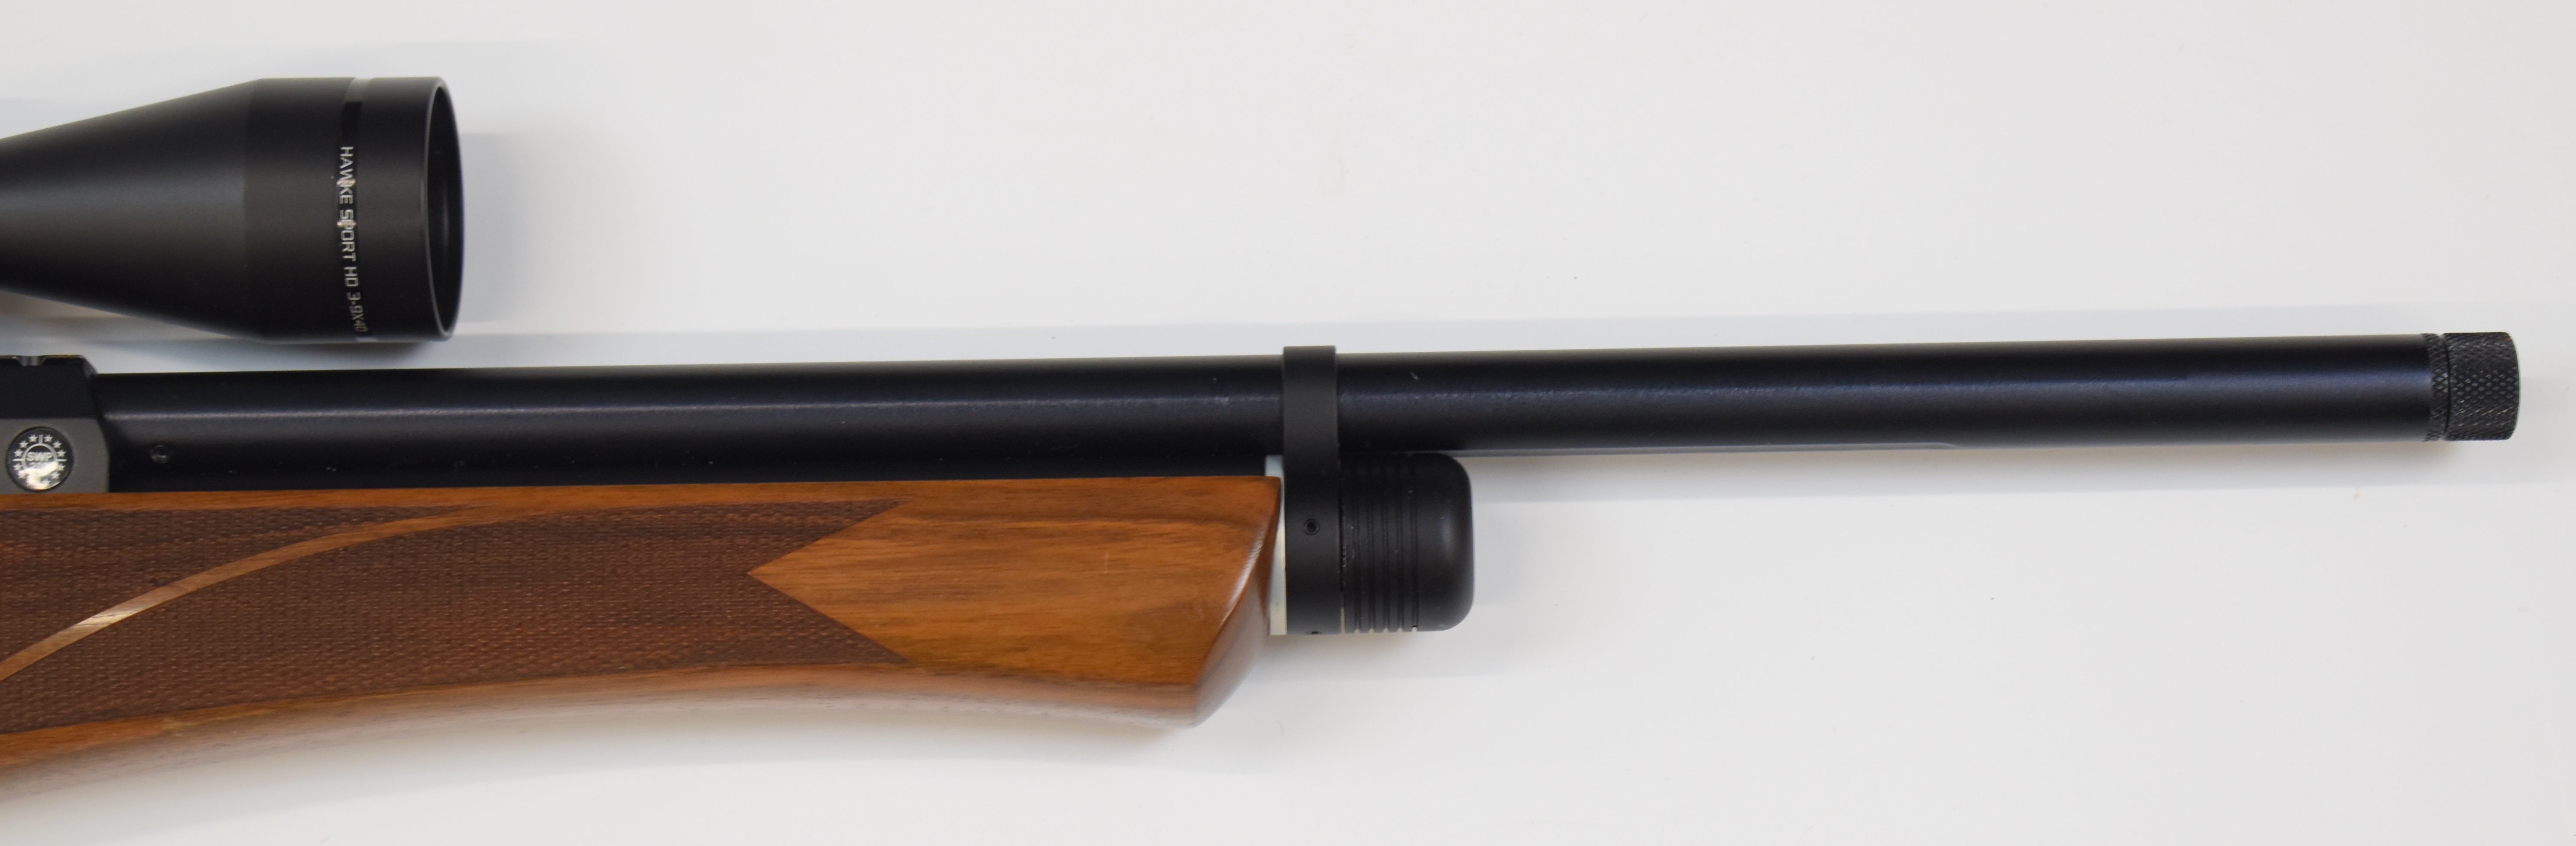 Daystate Huntsman Classic .177 PCP air rifle with monogrammed and chequered semi-pistol grip, - Image 5 of 9